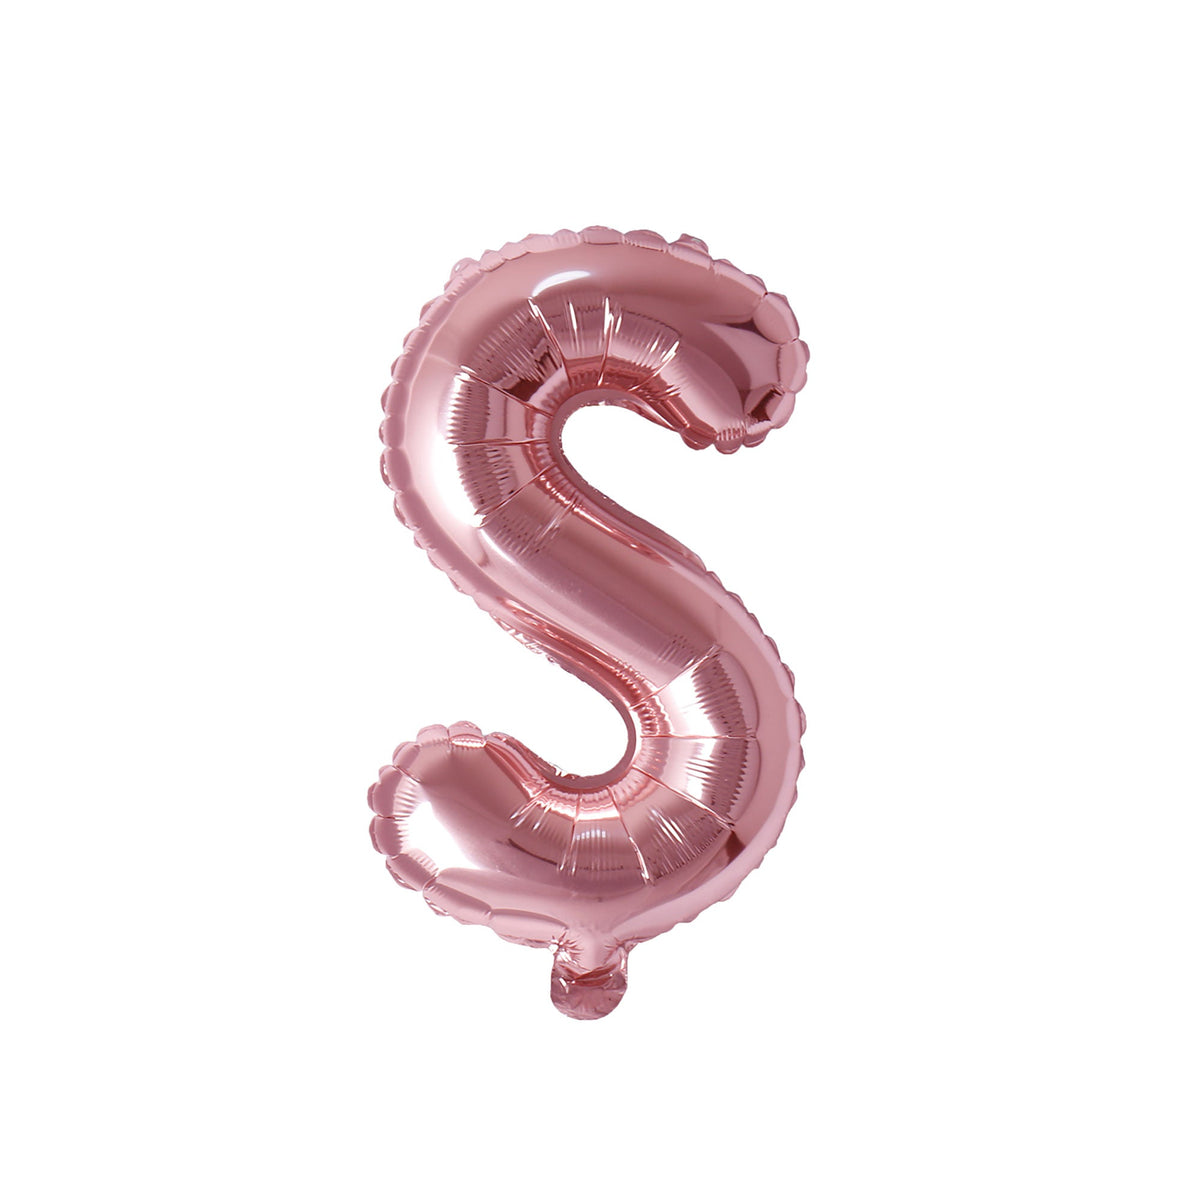 PARTY EXPERT Balloons Rose Gold Letter S Foil Balloon, 16 Inches, 1 Count 810064194375